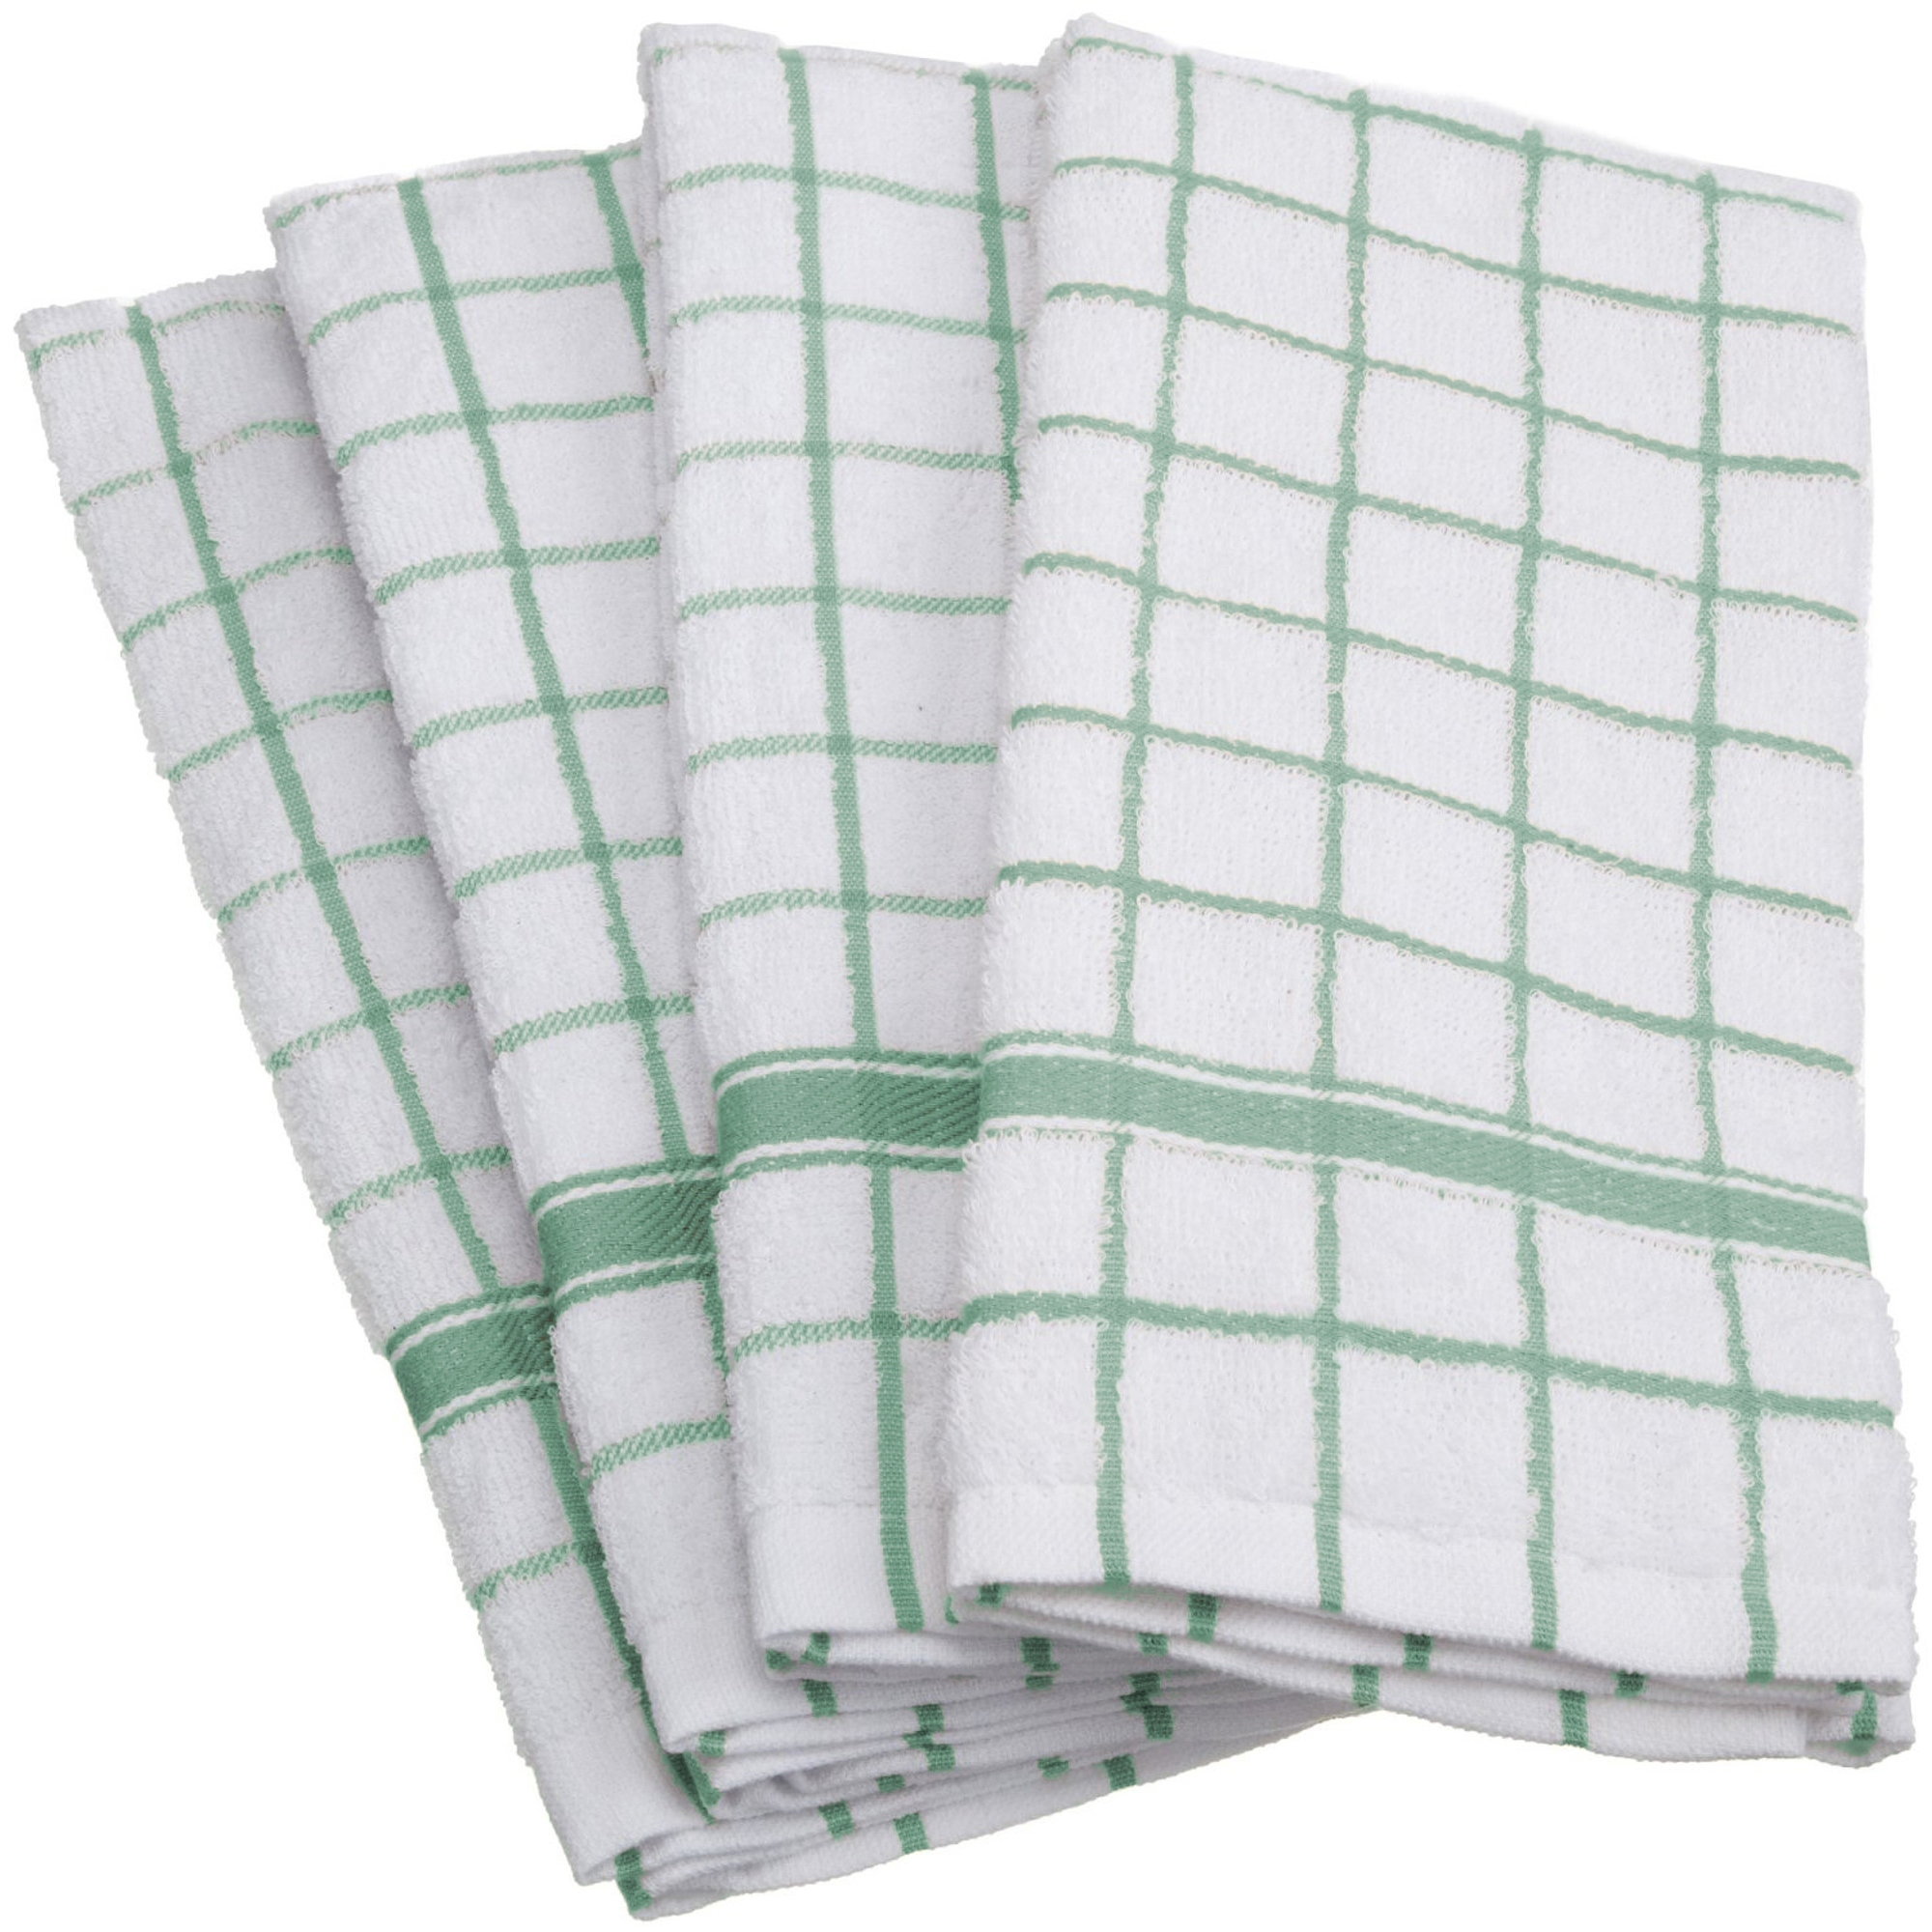 https://ak1.ostkcdn.com/images/products/10517541/Windowpane-Dishtowel-Set-of-4-57a290a1-8d61-43b0-a3c0-a9121c65a26f.jpg